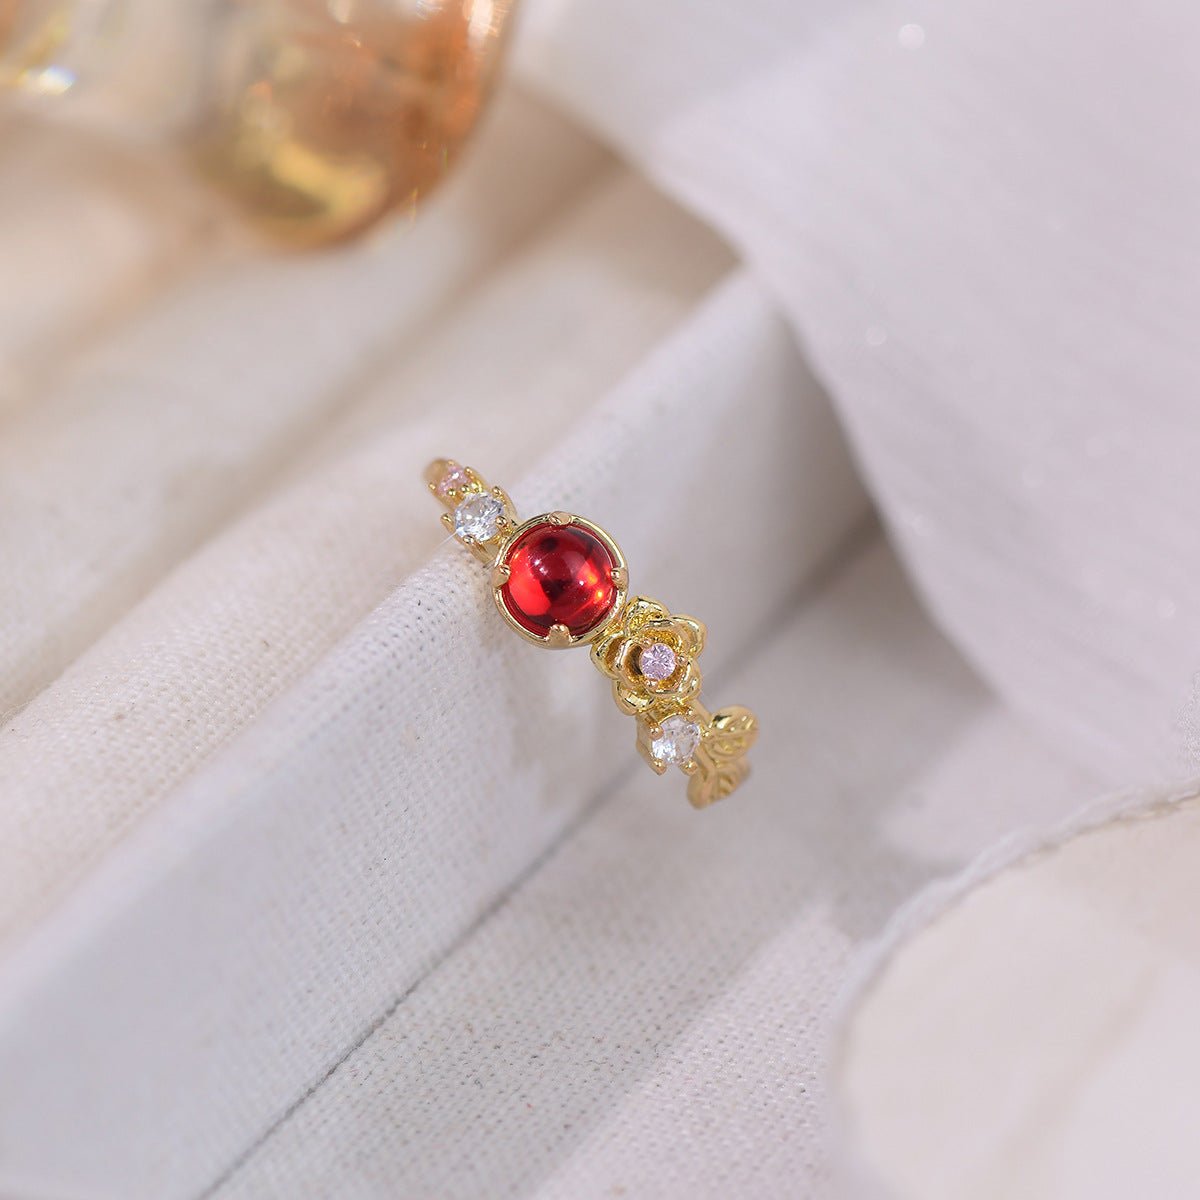 [Clearance] Red Gem Rose Ring - Gold - Plated - Abbott Atelier